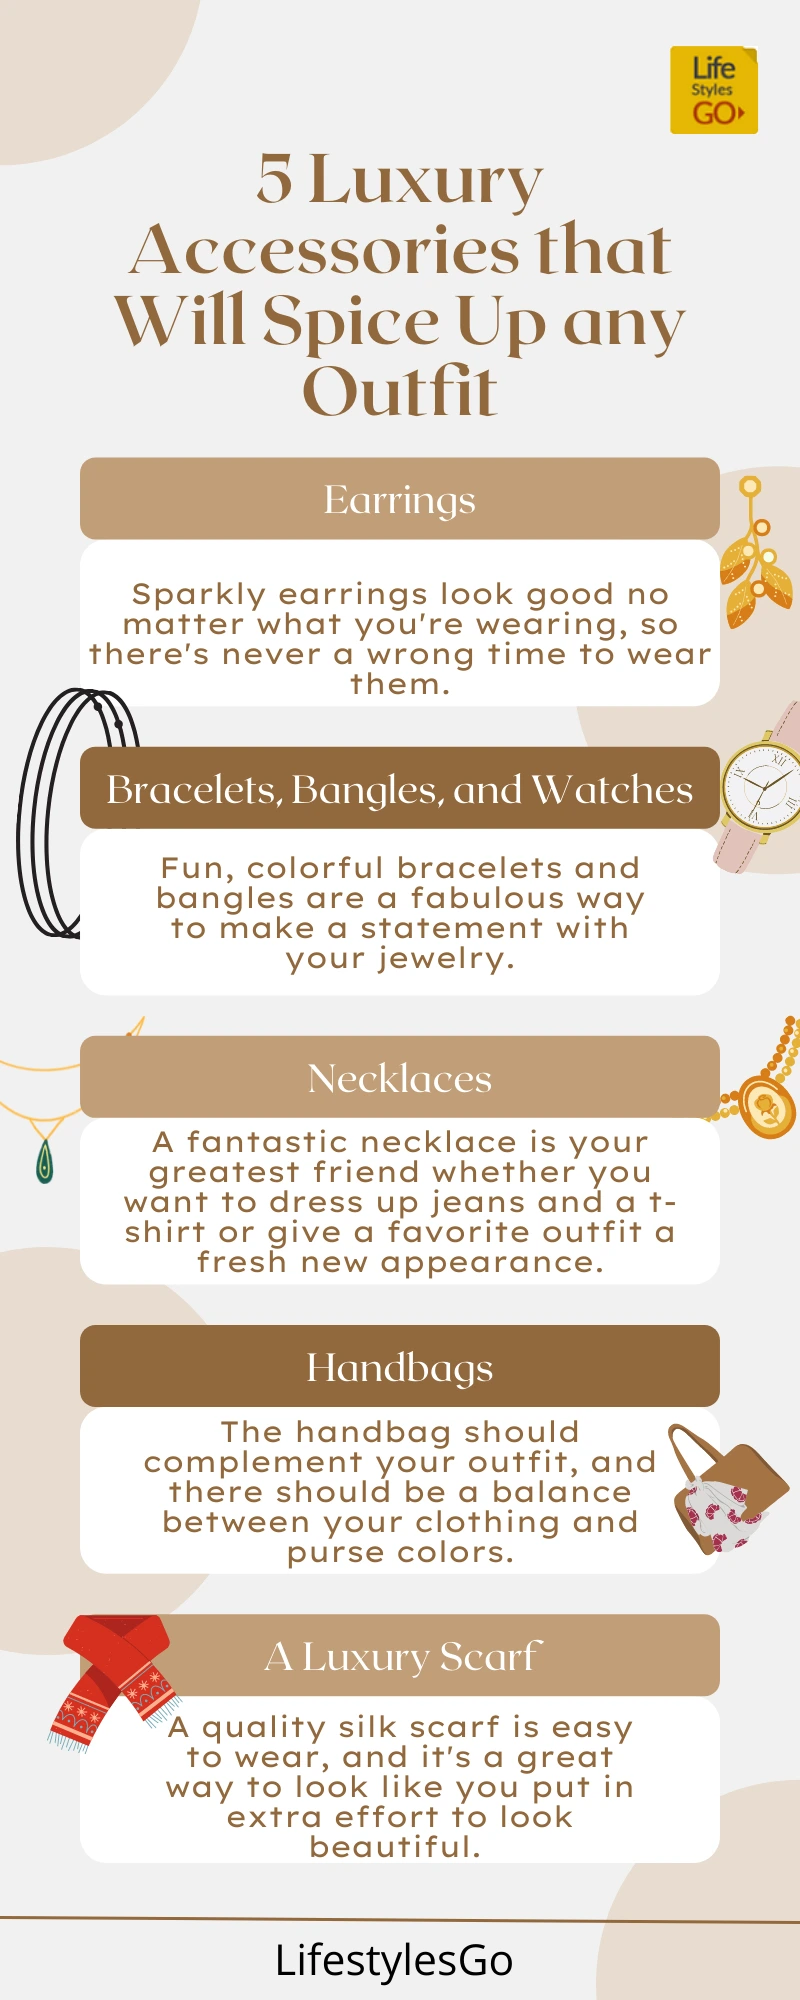 5 Luxury Accessories that Will Spice Up any Outfit Infographic